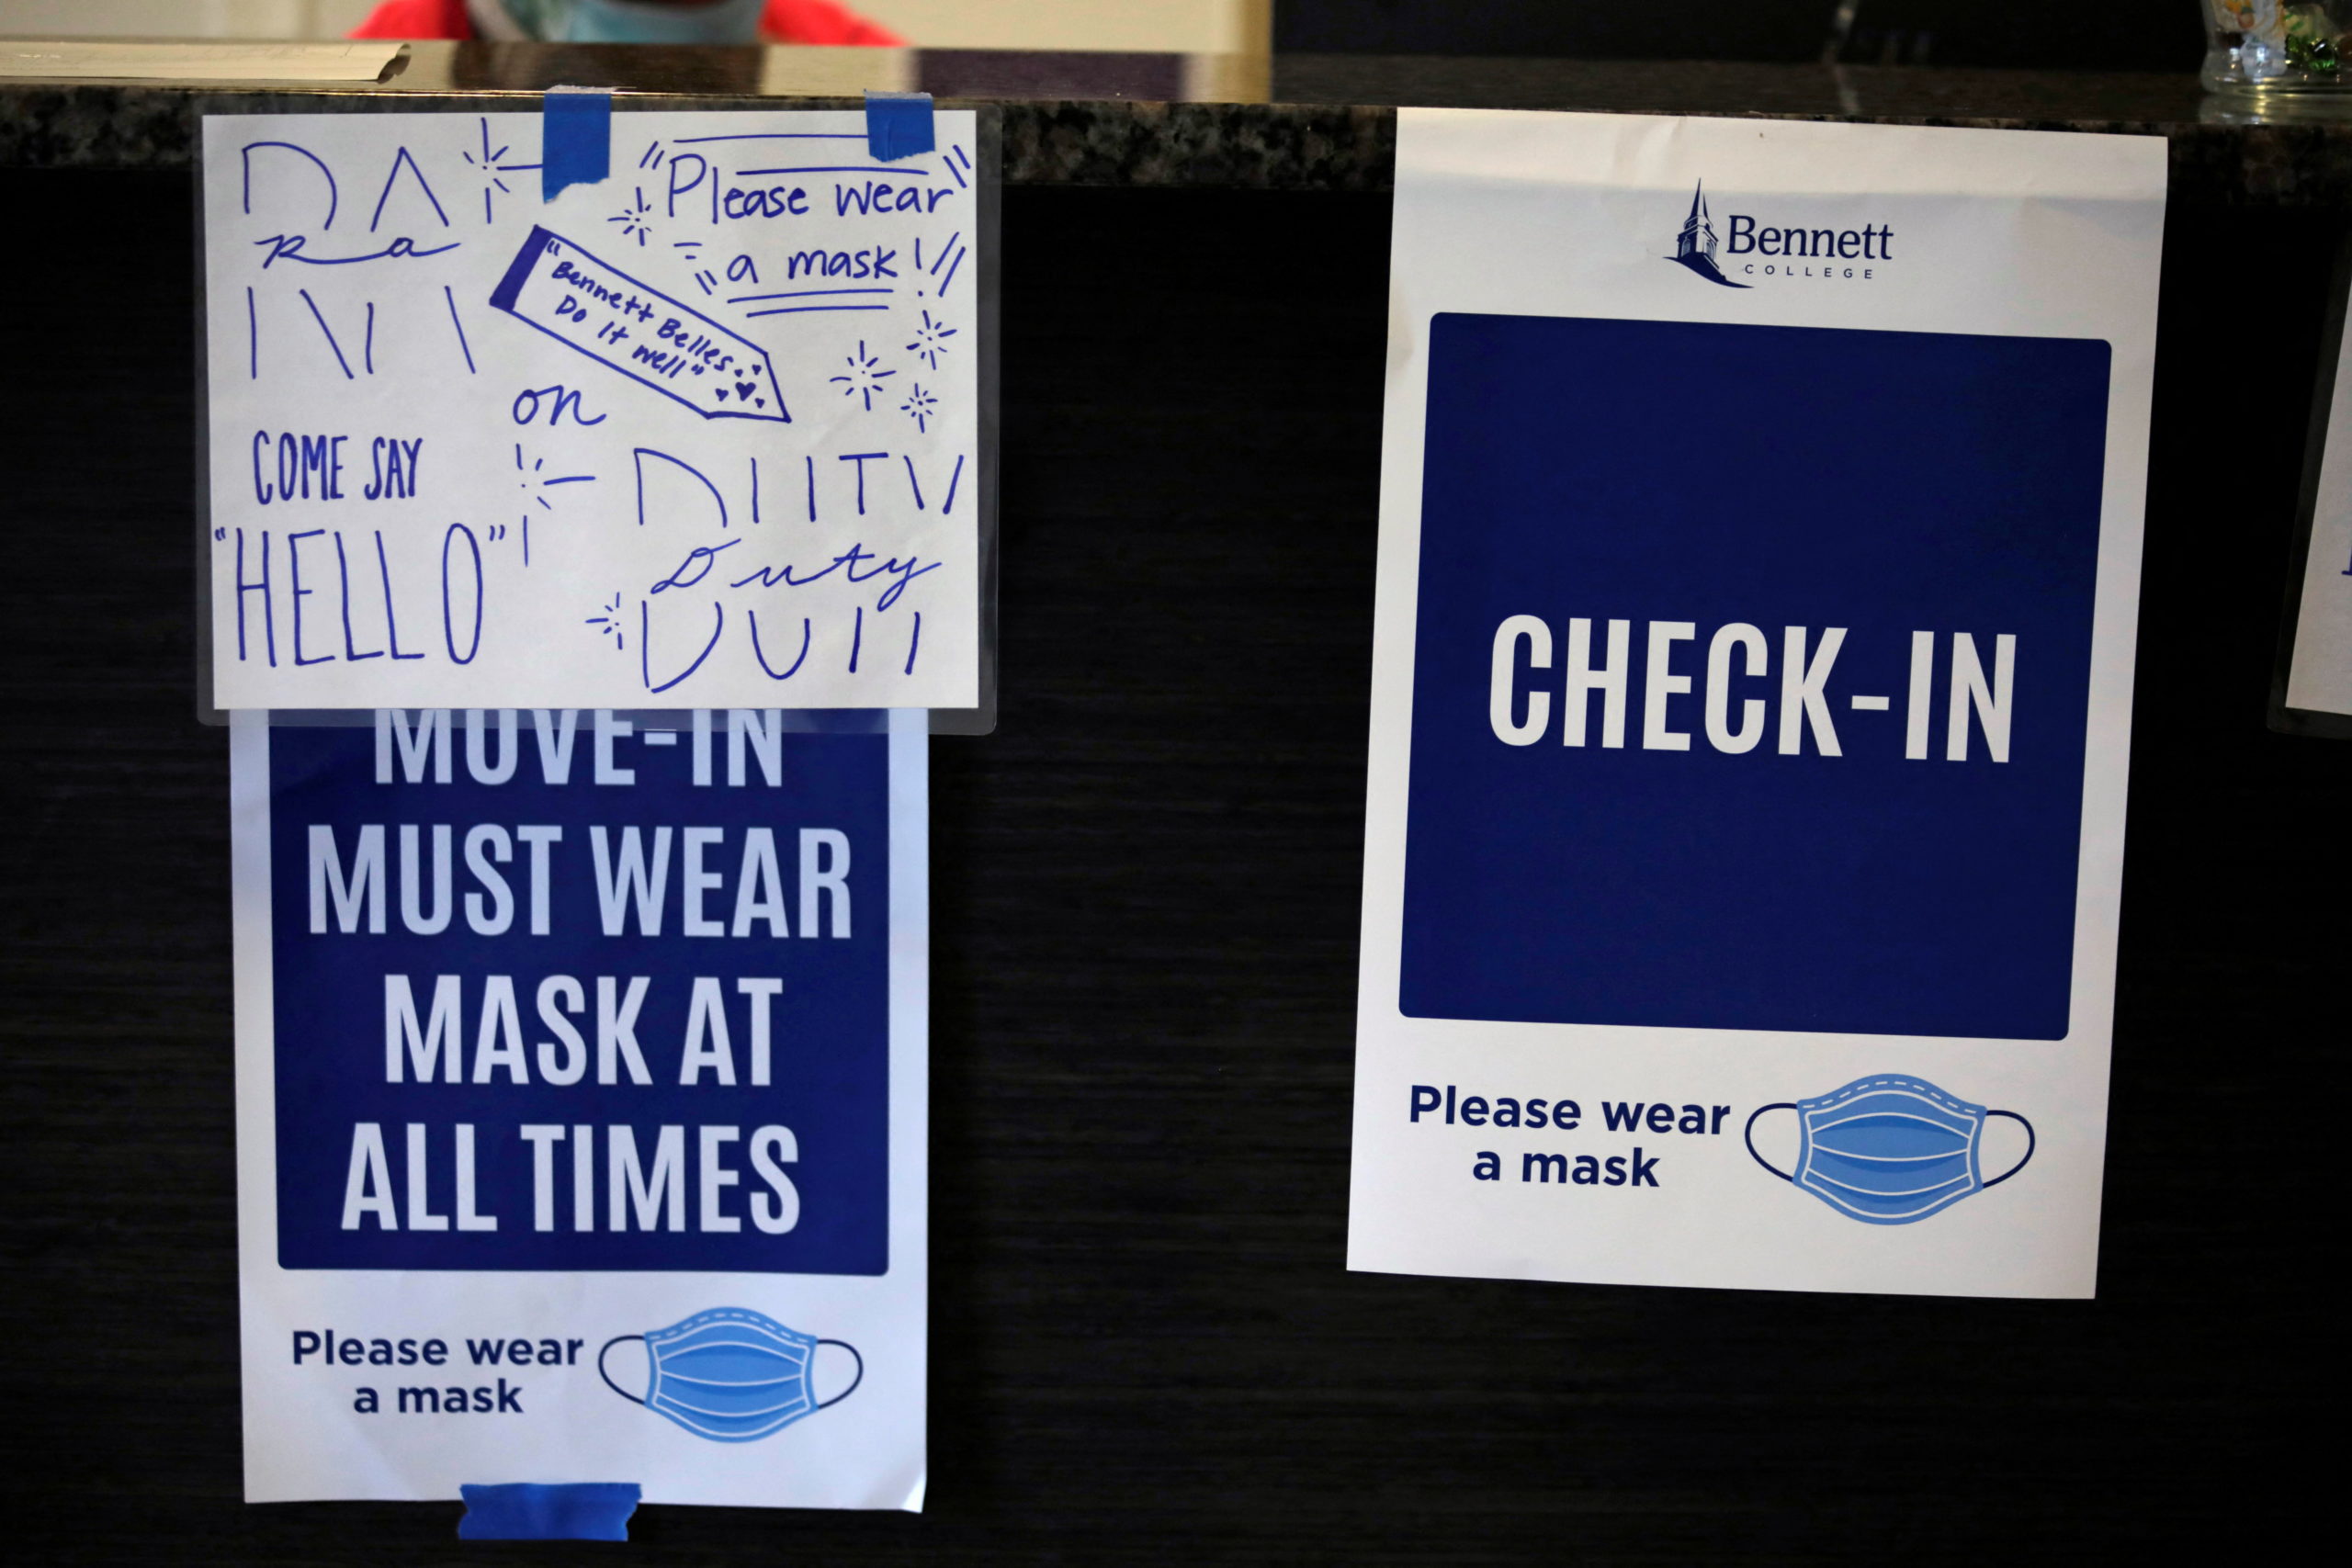 Signs reminding students to wear their masks are seen during move in day as Bennett College students return to campus for the first time since the HBCU Liberal Arts College went remote to prevent the spread of the coronavirus disease (COVID-19) in March 2020, in Greensboro, North Carolina, U.S., August 30, 2021. REUTERS/Gabrielle Crockett